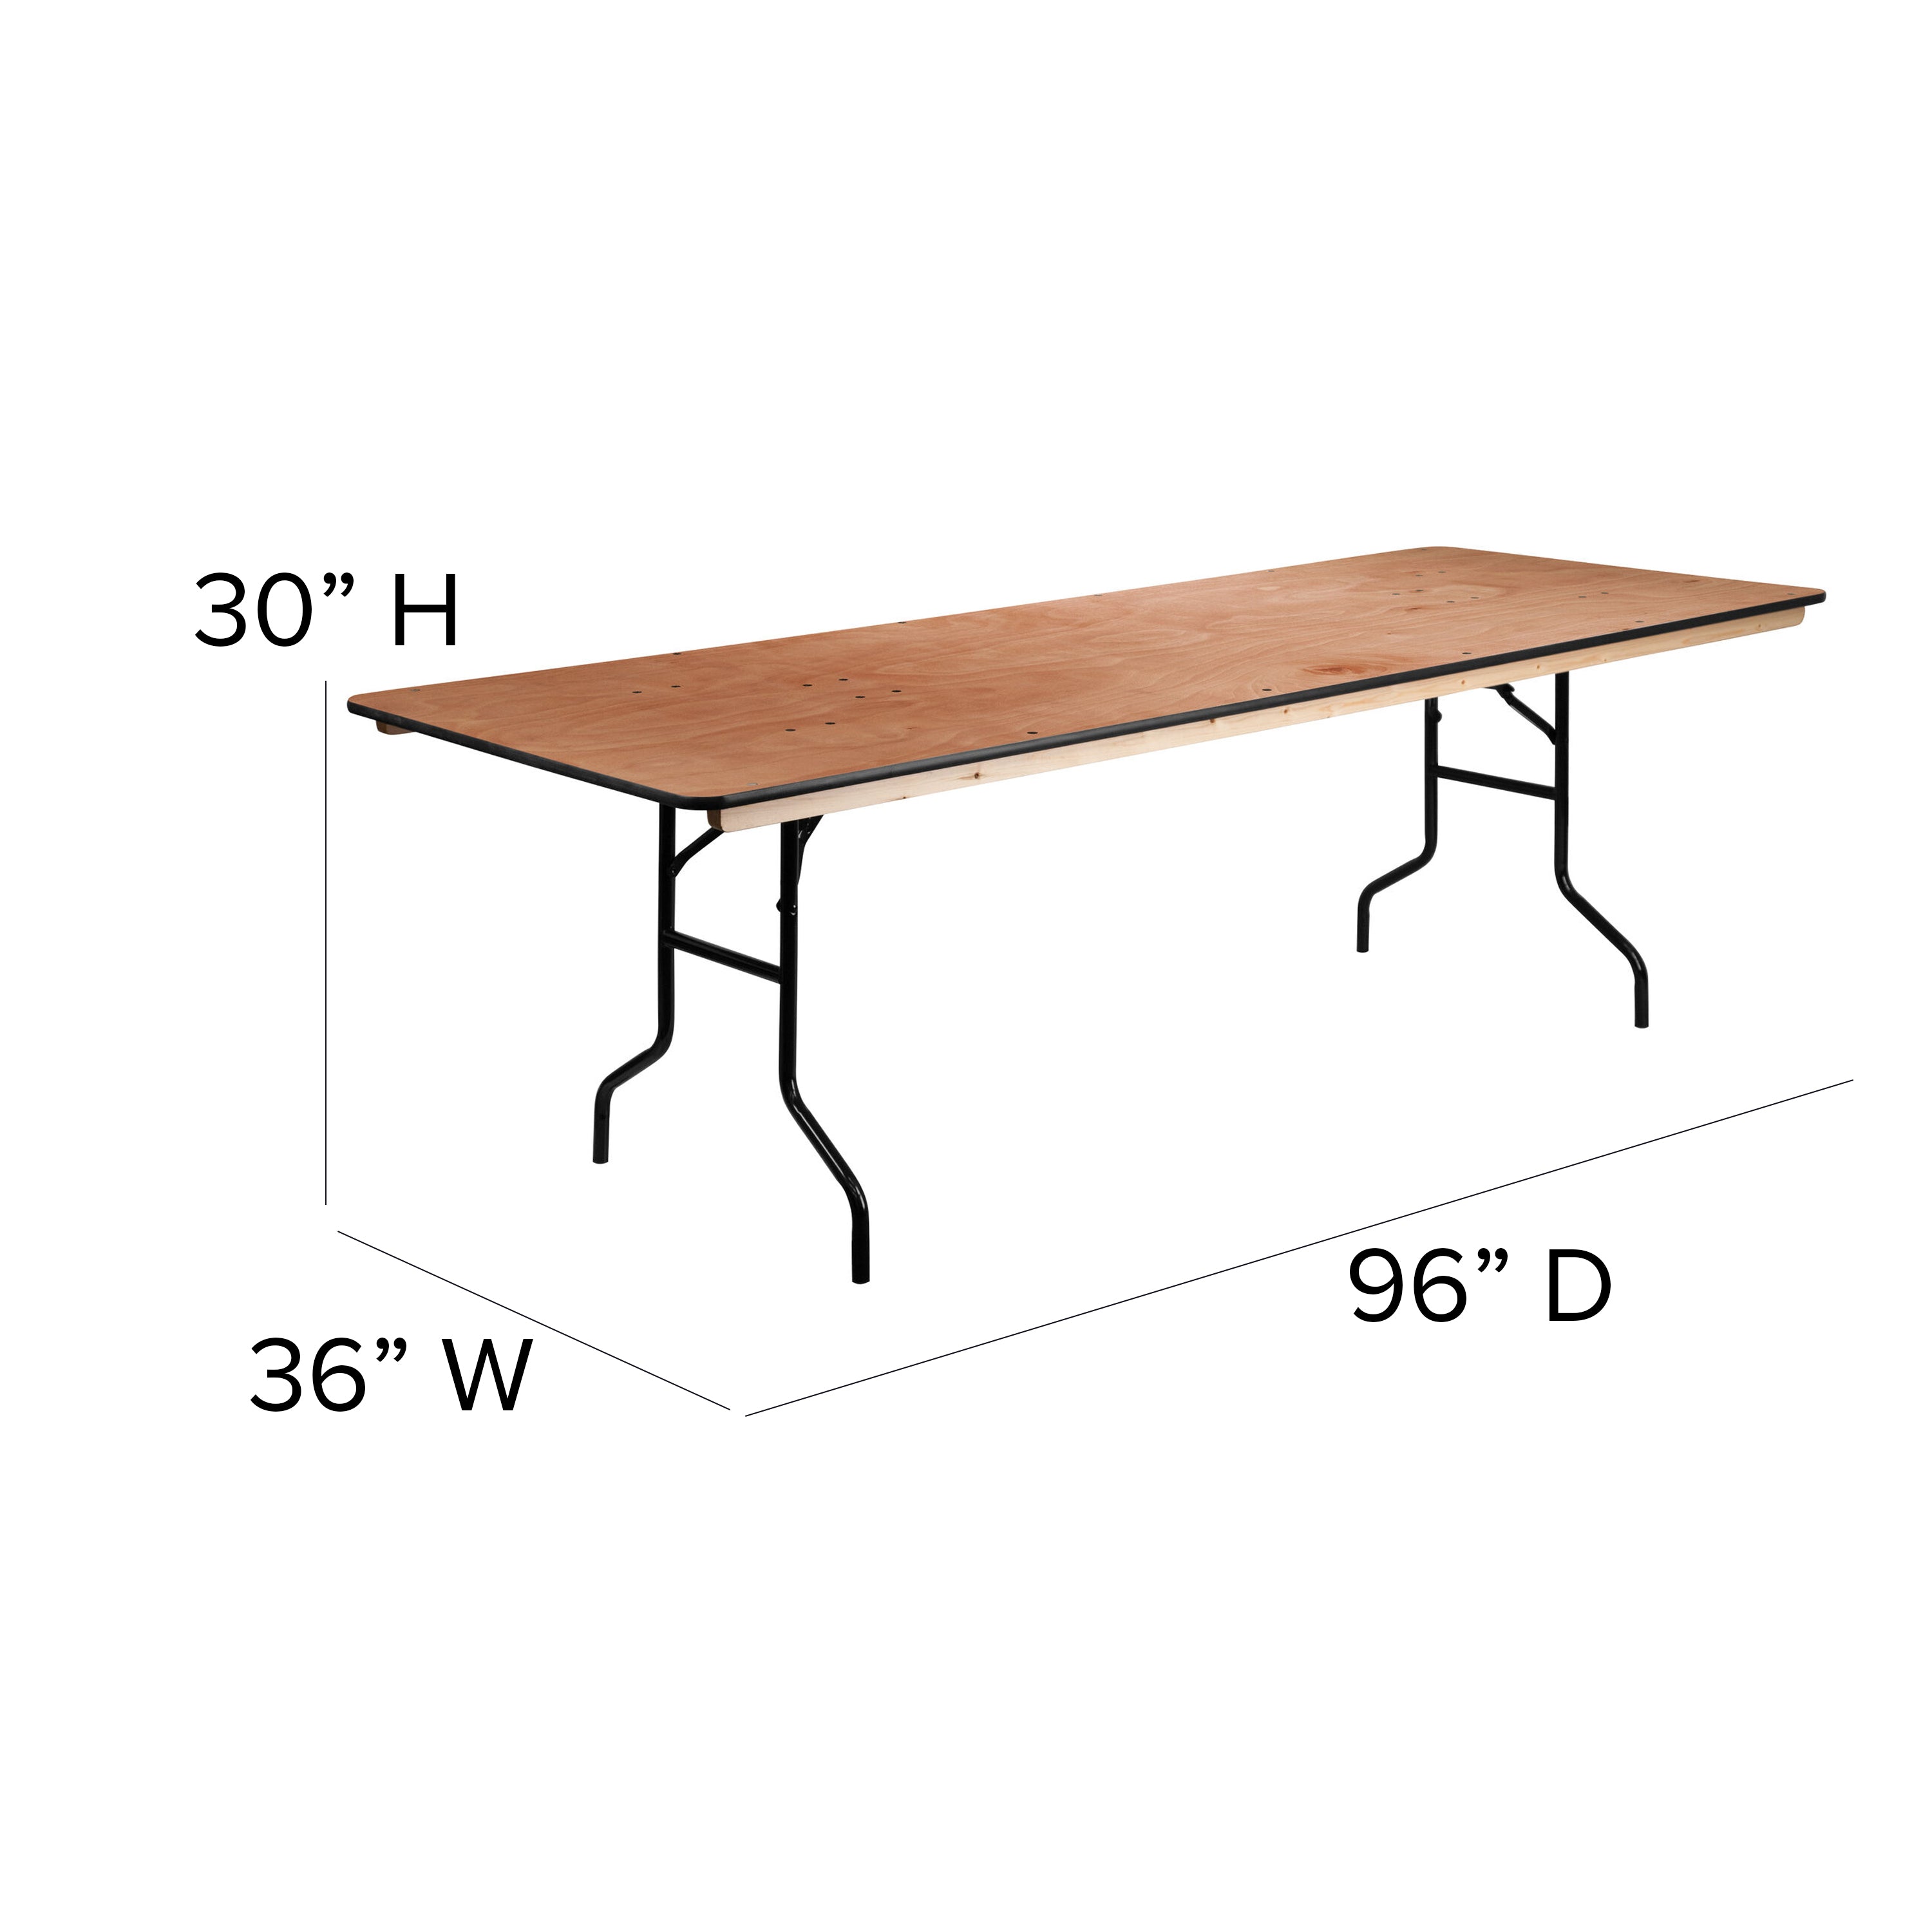 8-Foot Rectangular Wood Folding Banquet Table with Clear Coated Finished Top-Rectangular Folding Table-Flash Furniture-Wall2Wall Furnishings